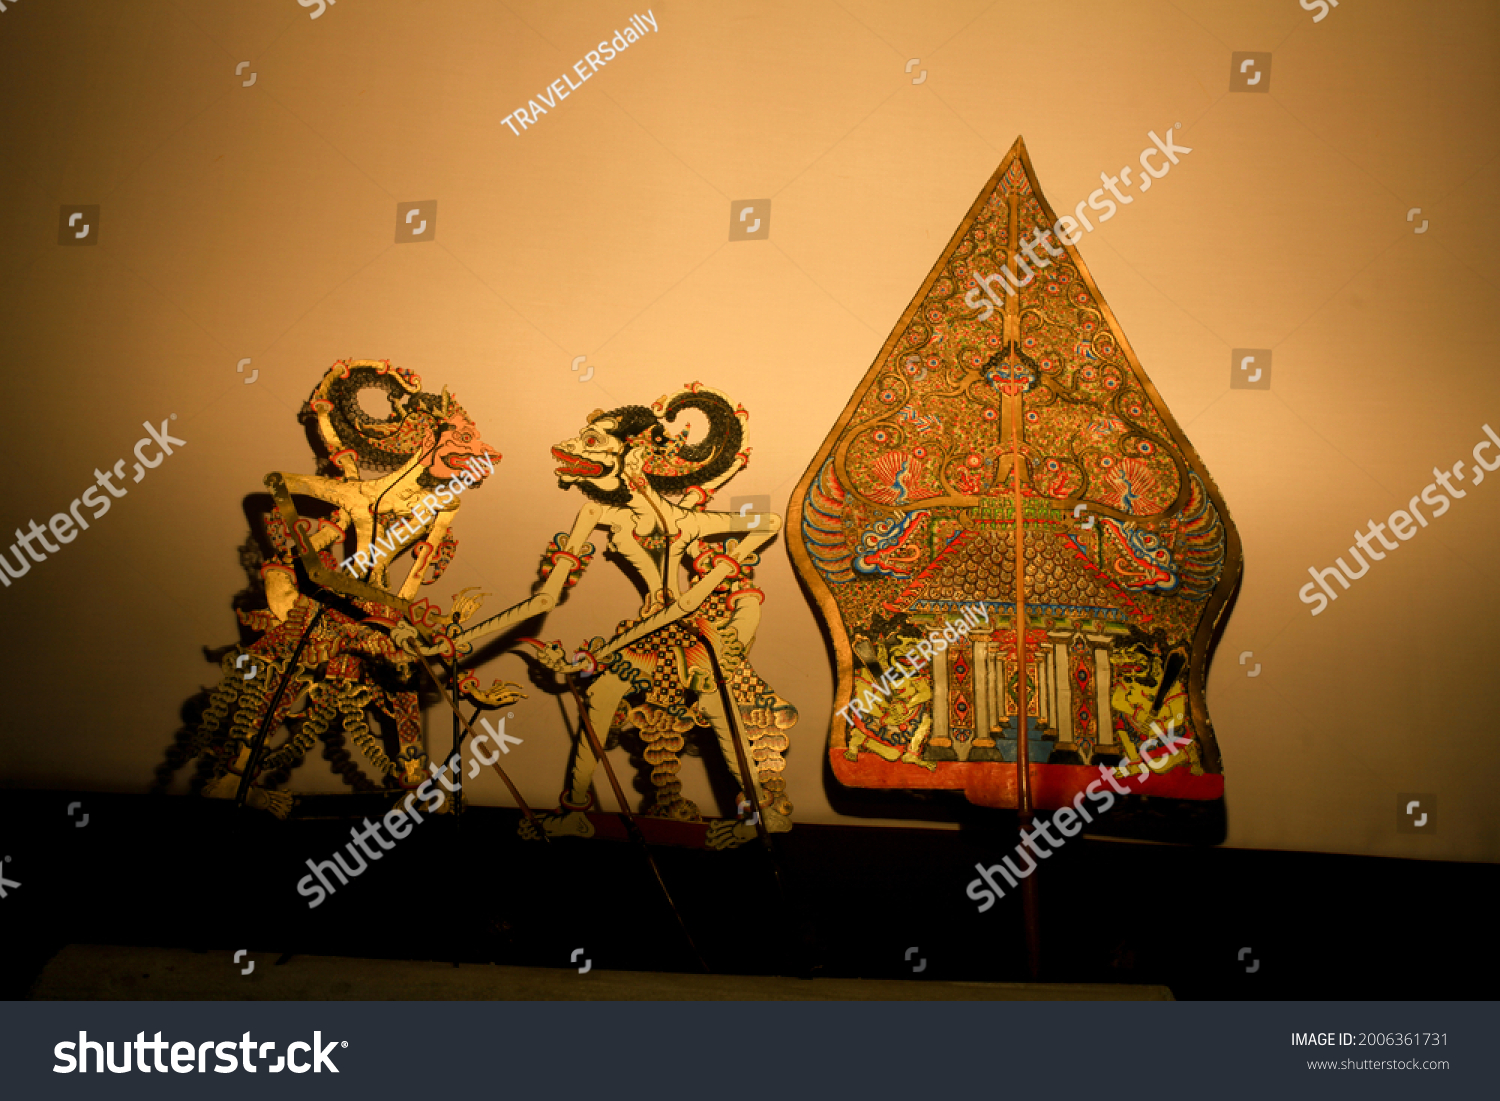 Stock Photo The Most Famous Indonesian Traditional Puppets Show In Museum Wayang Jakarta Indonesia 2006361731 